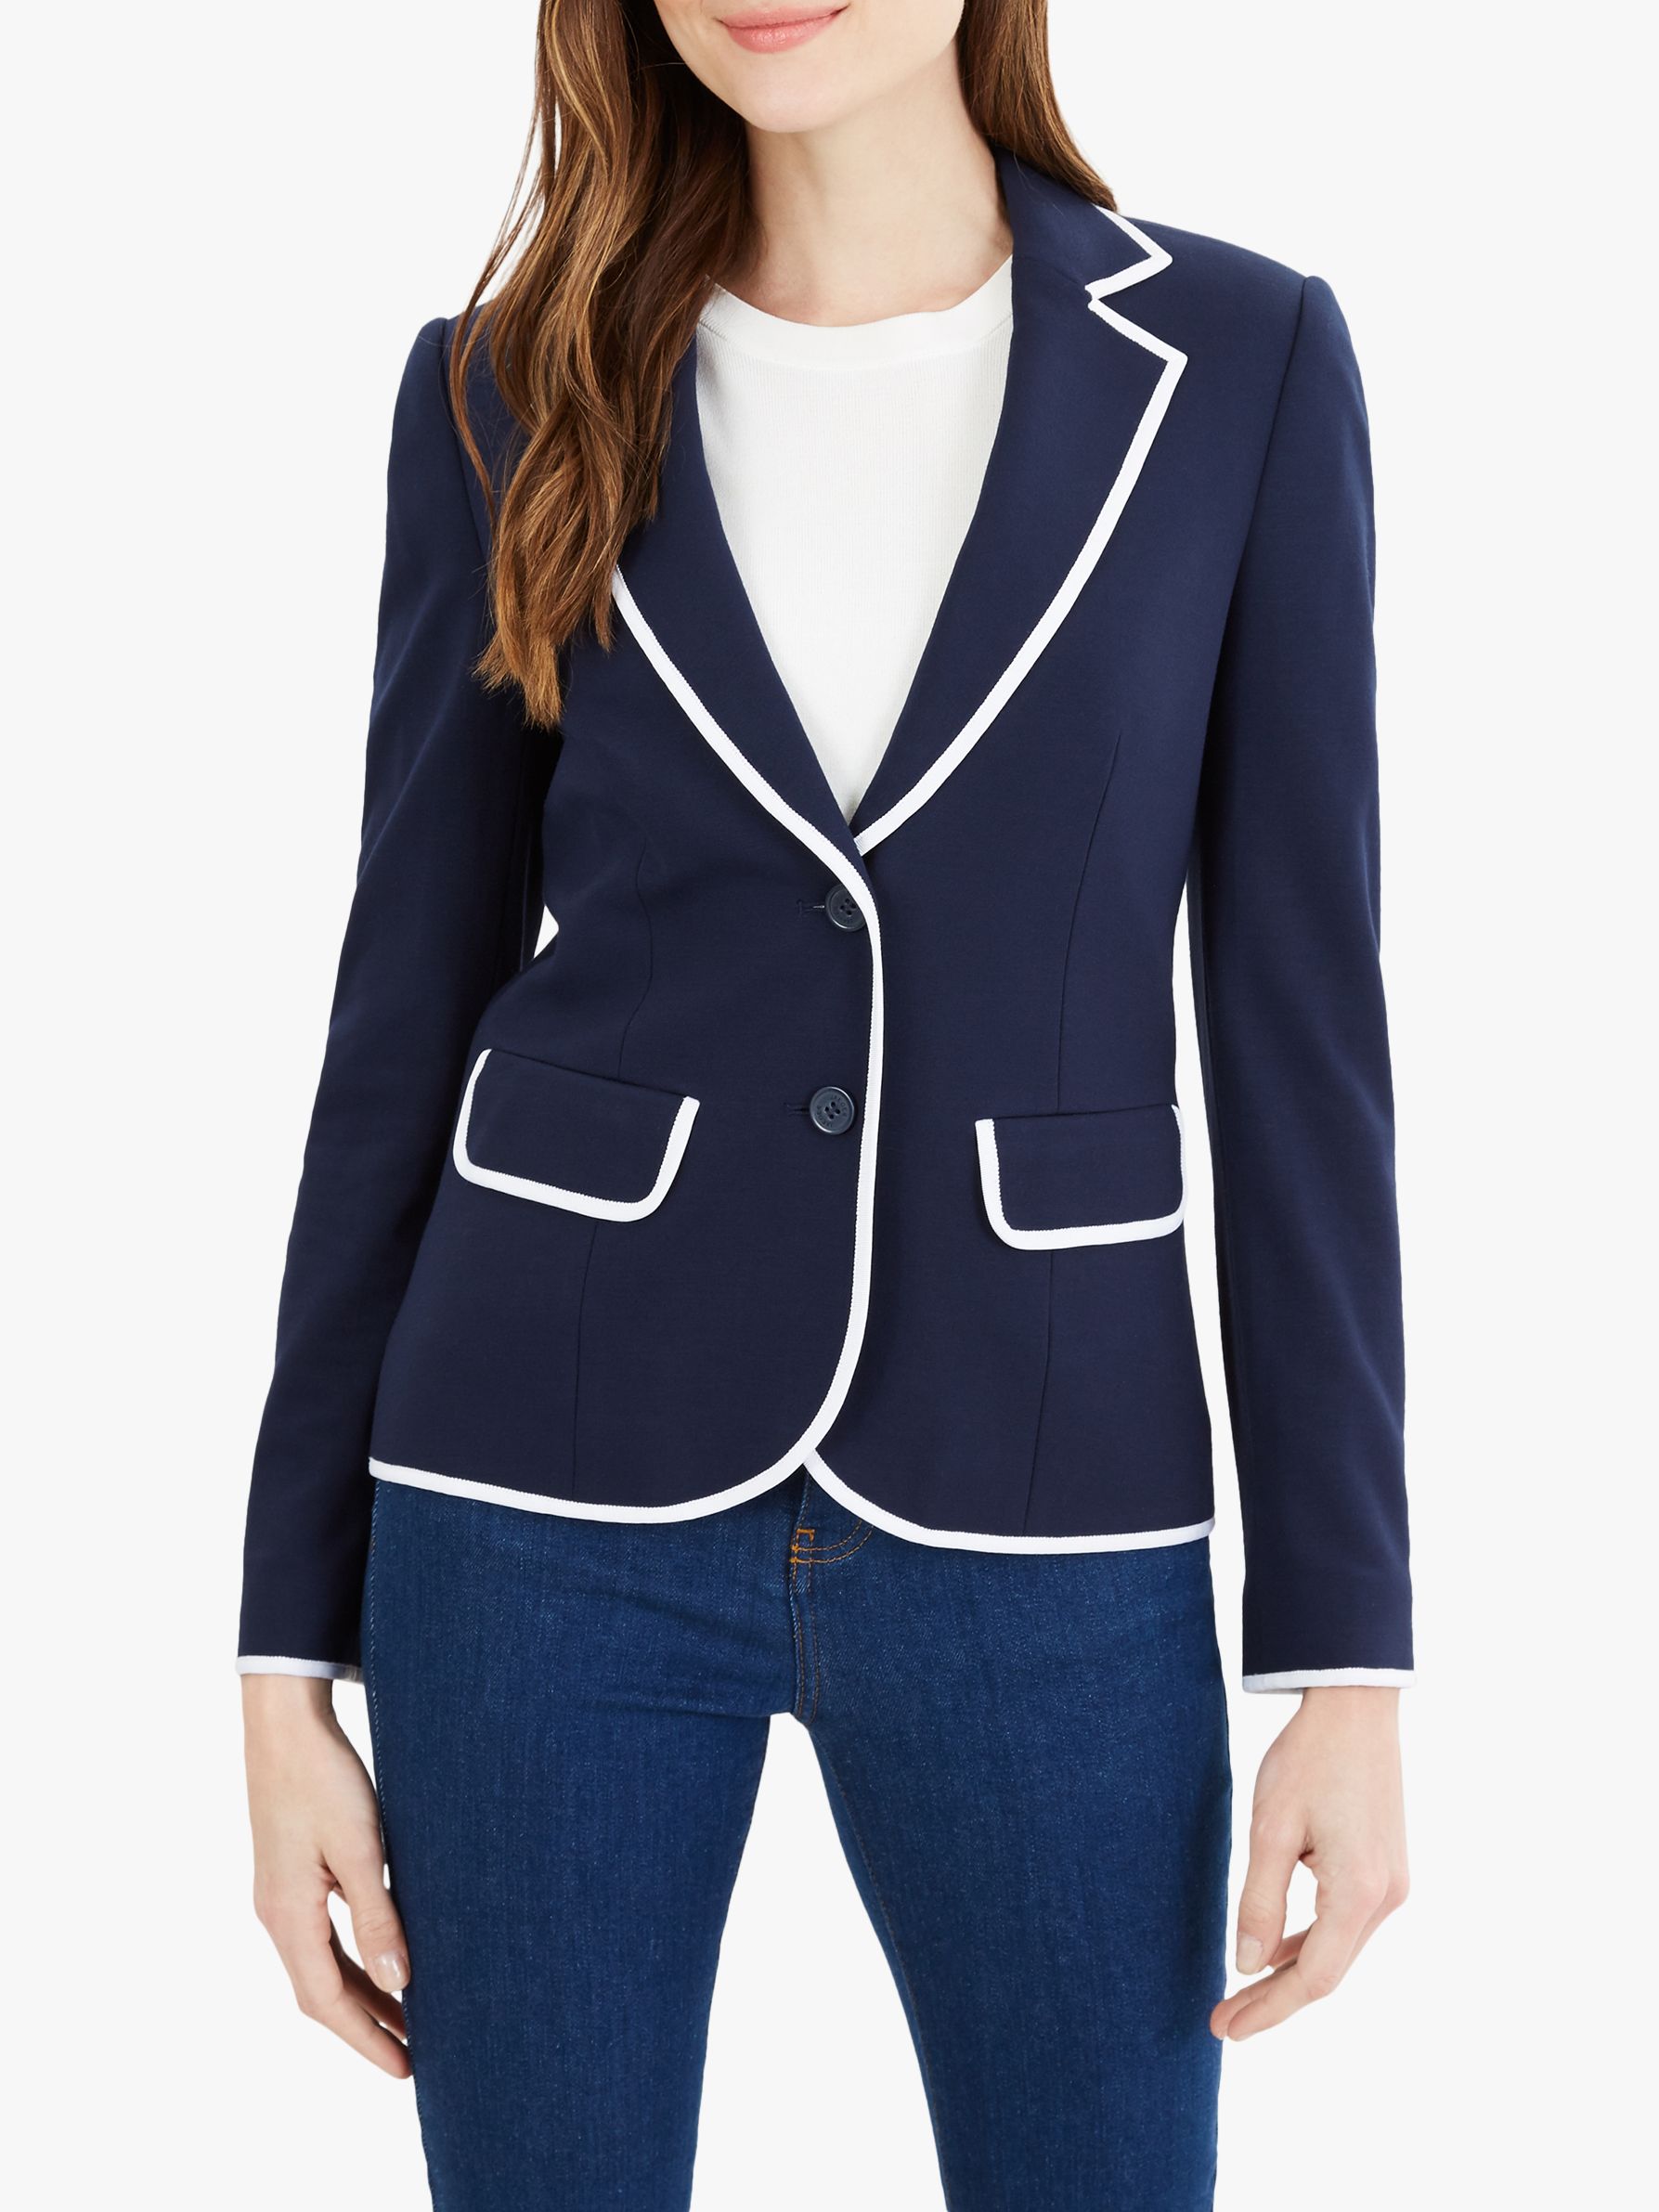 Jaeger Piped Jersey Jacket, Navy at John Lewis & Partners